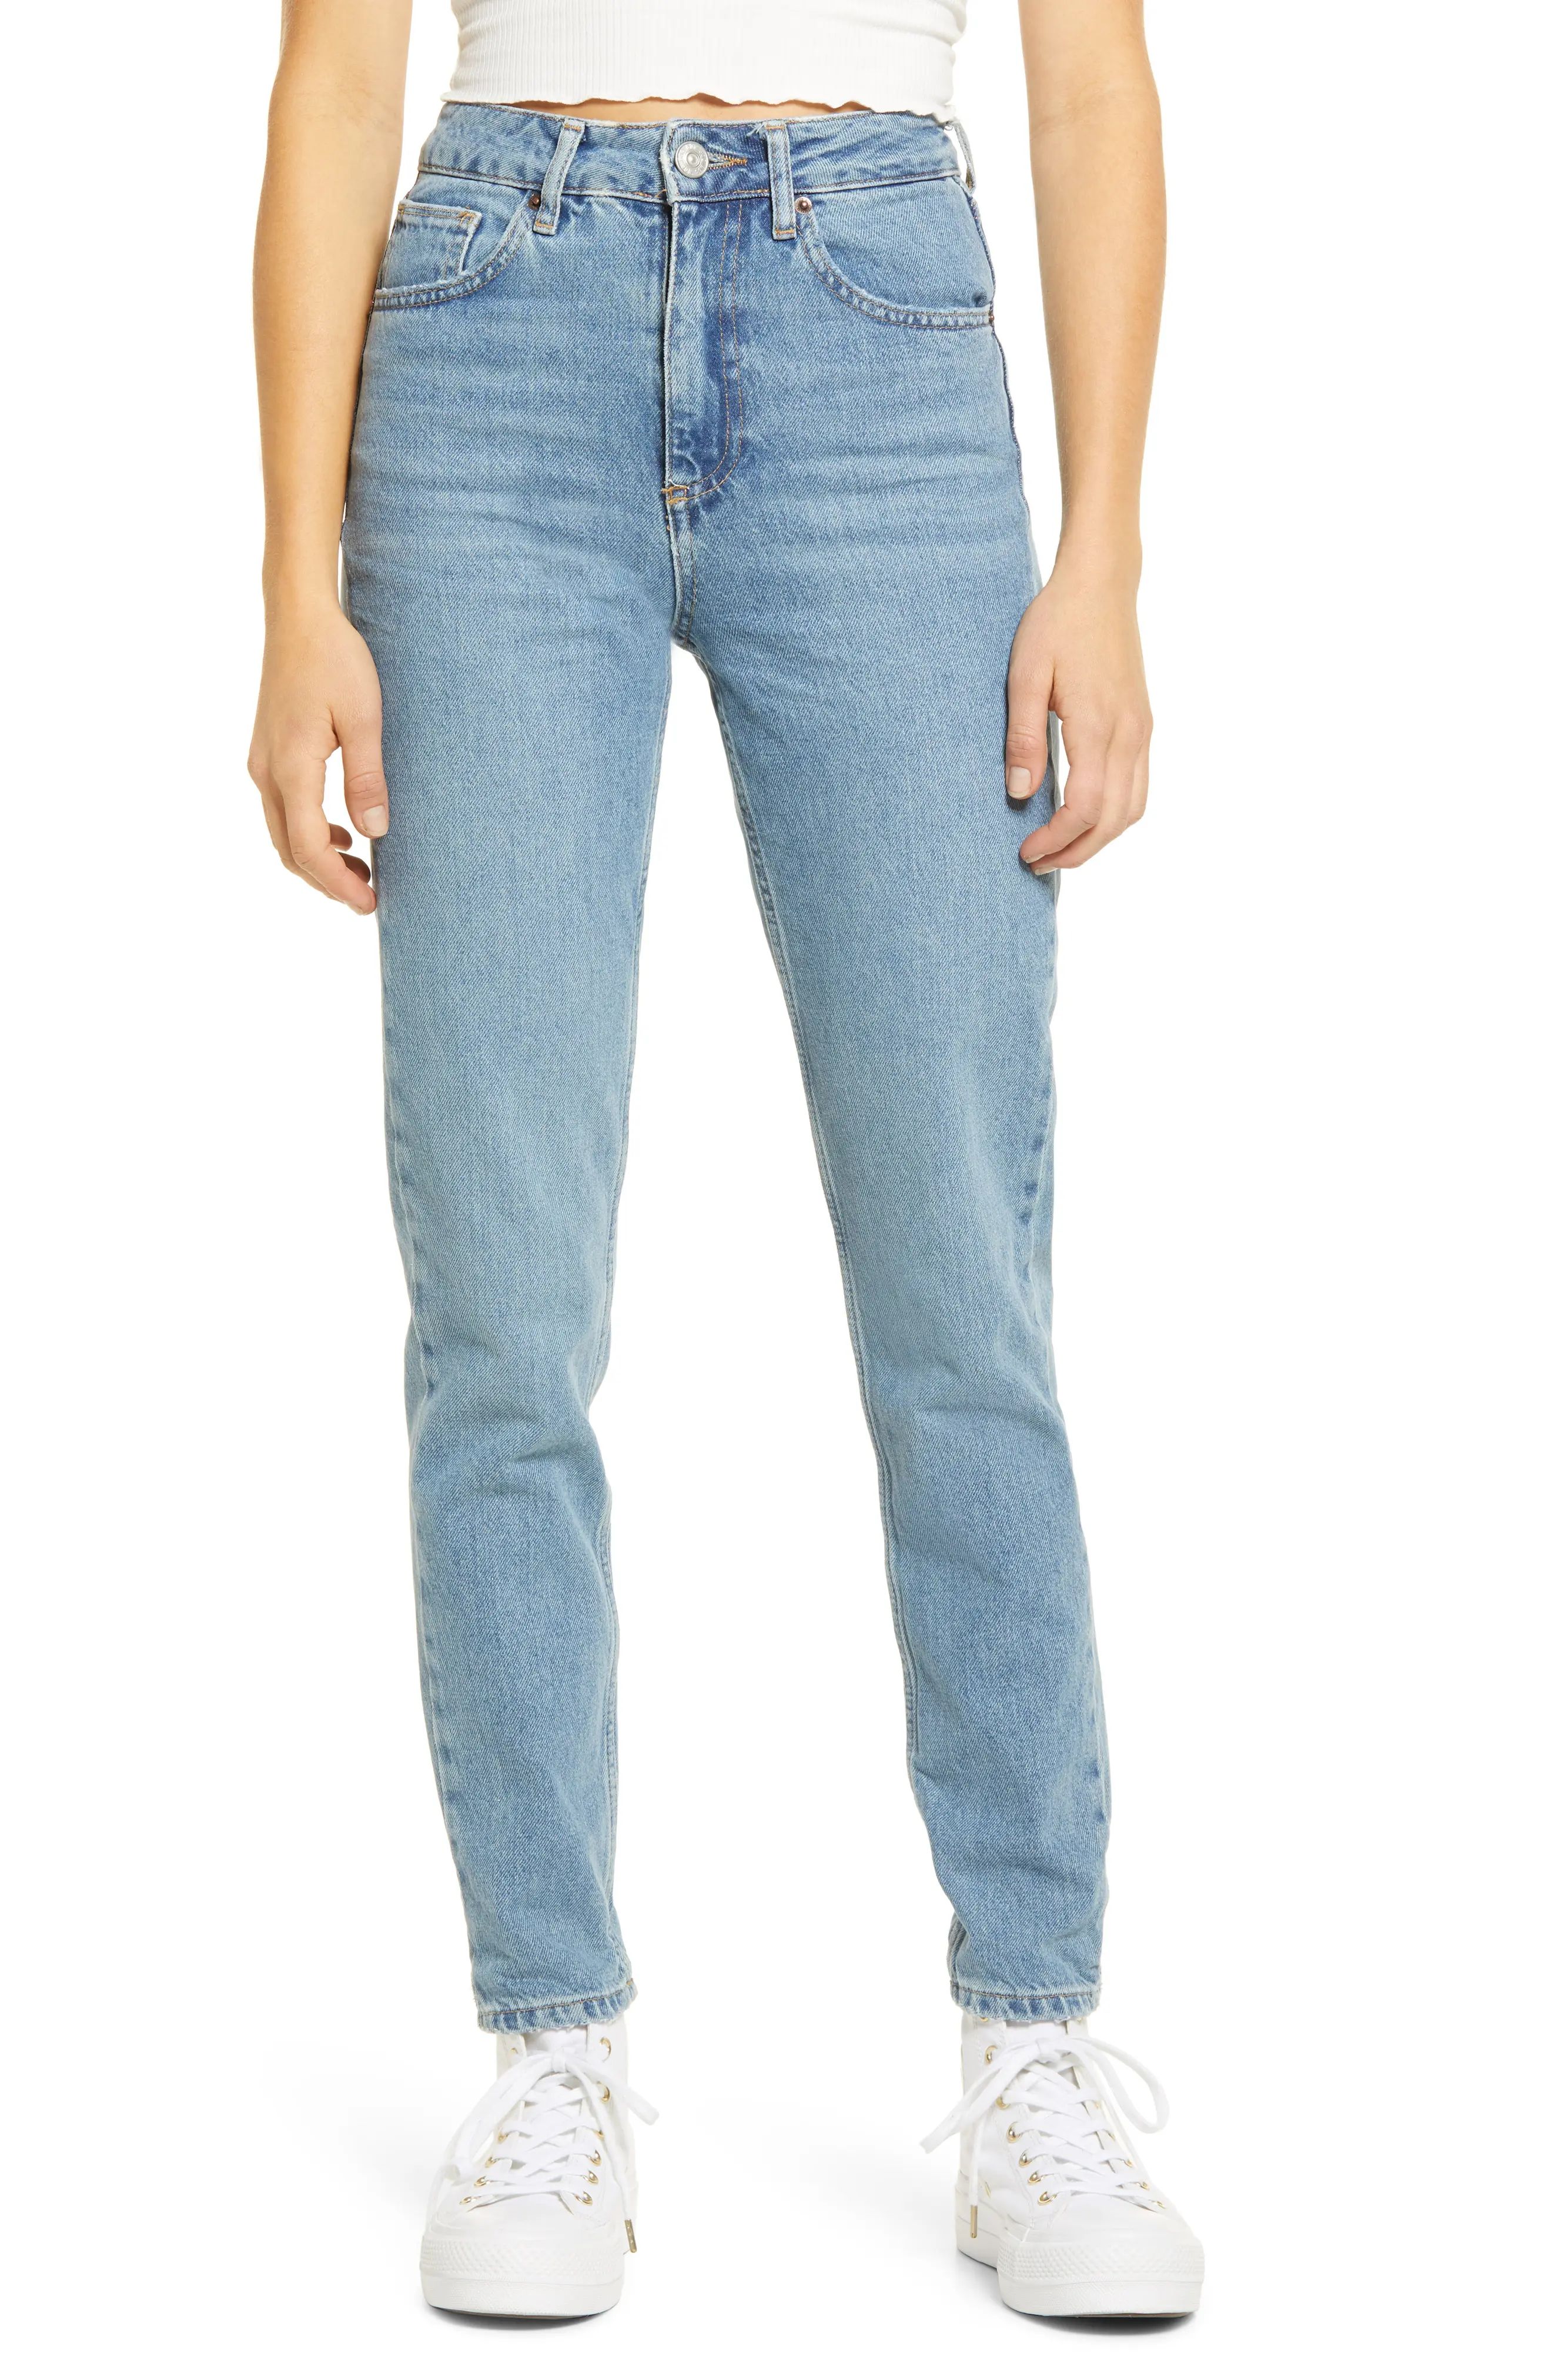 Women's Bdg Urban Outfitters High Waist Mom Jeans, Size 28 - Blue | Nordstrom